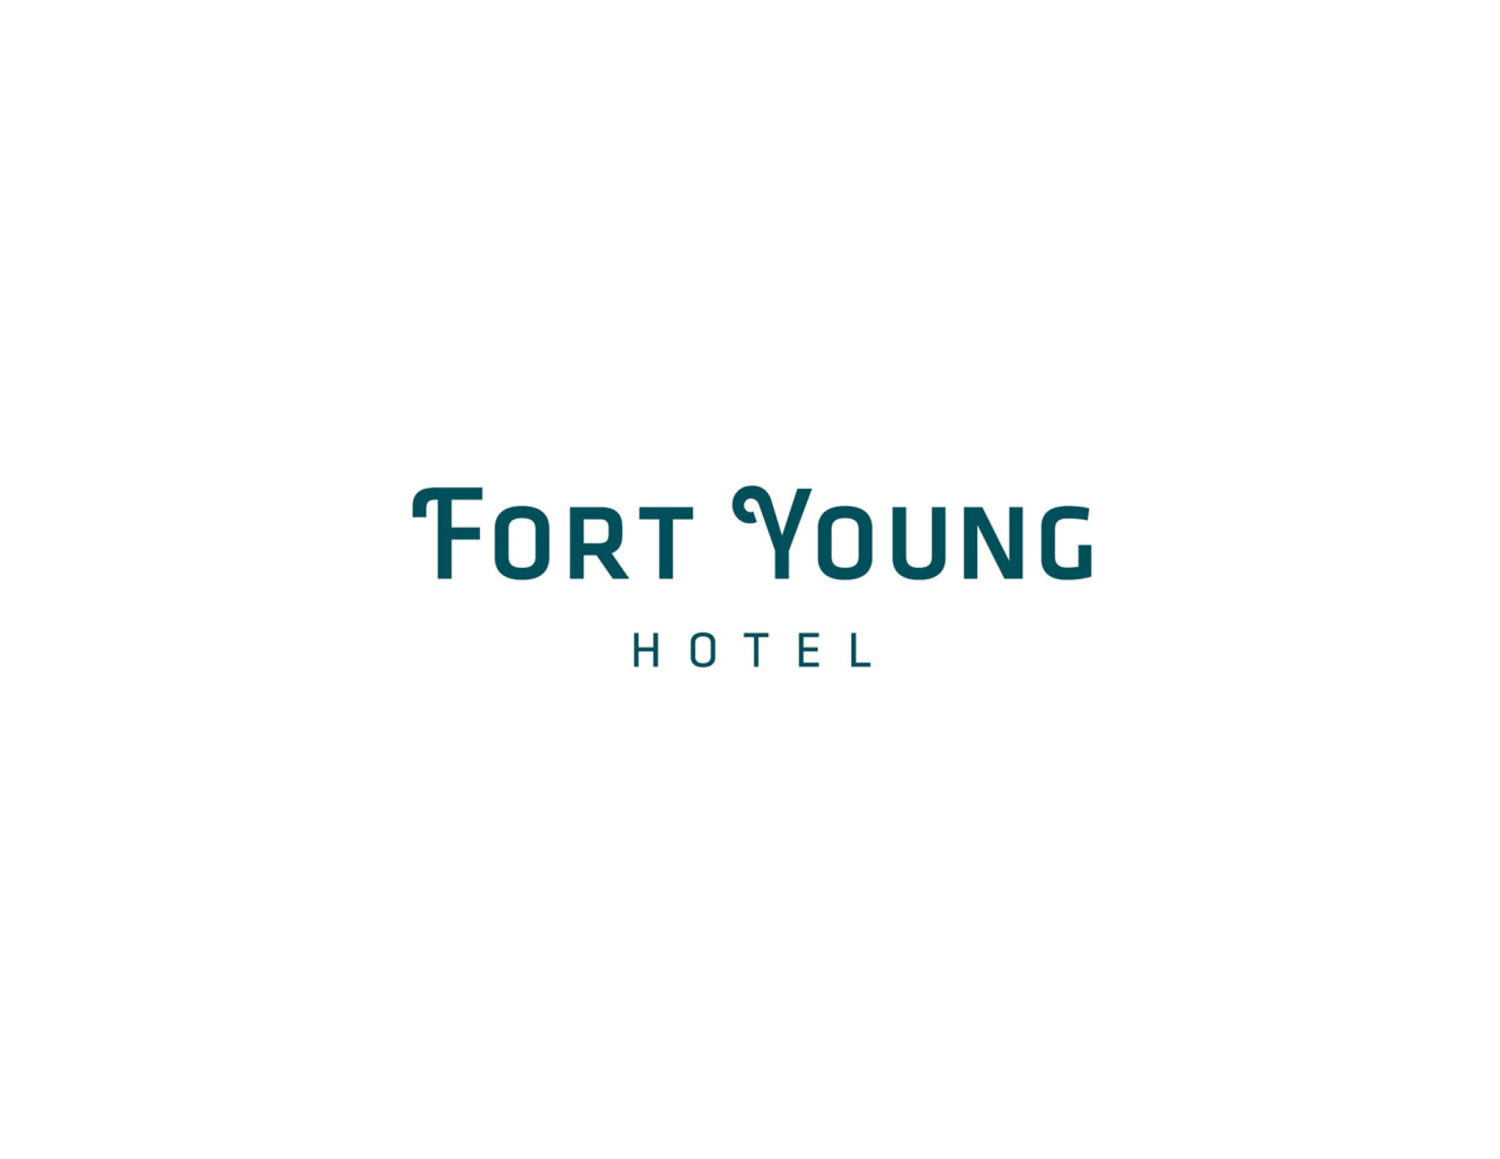 FORT YOUNG HOTEL & DIVE RESORT RESPONDS TO JOSHUA FRANCIS’ REMARKS CONCERNING THE PUBLIC LIBRARY